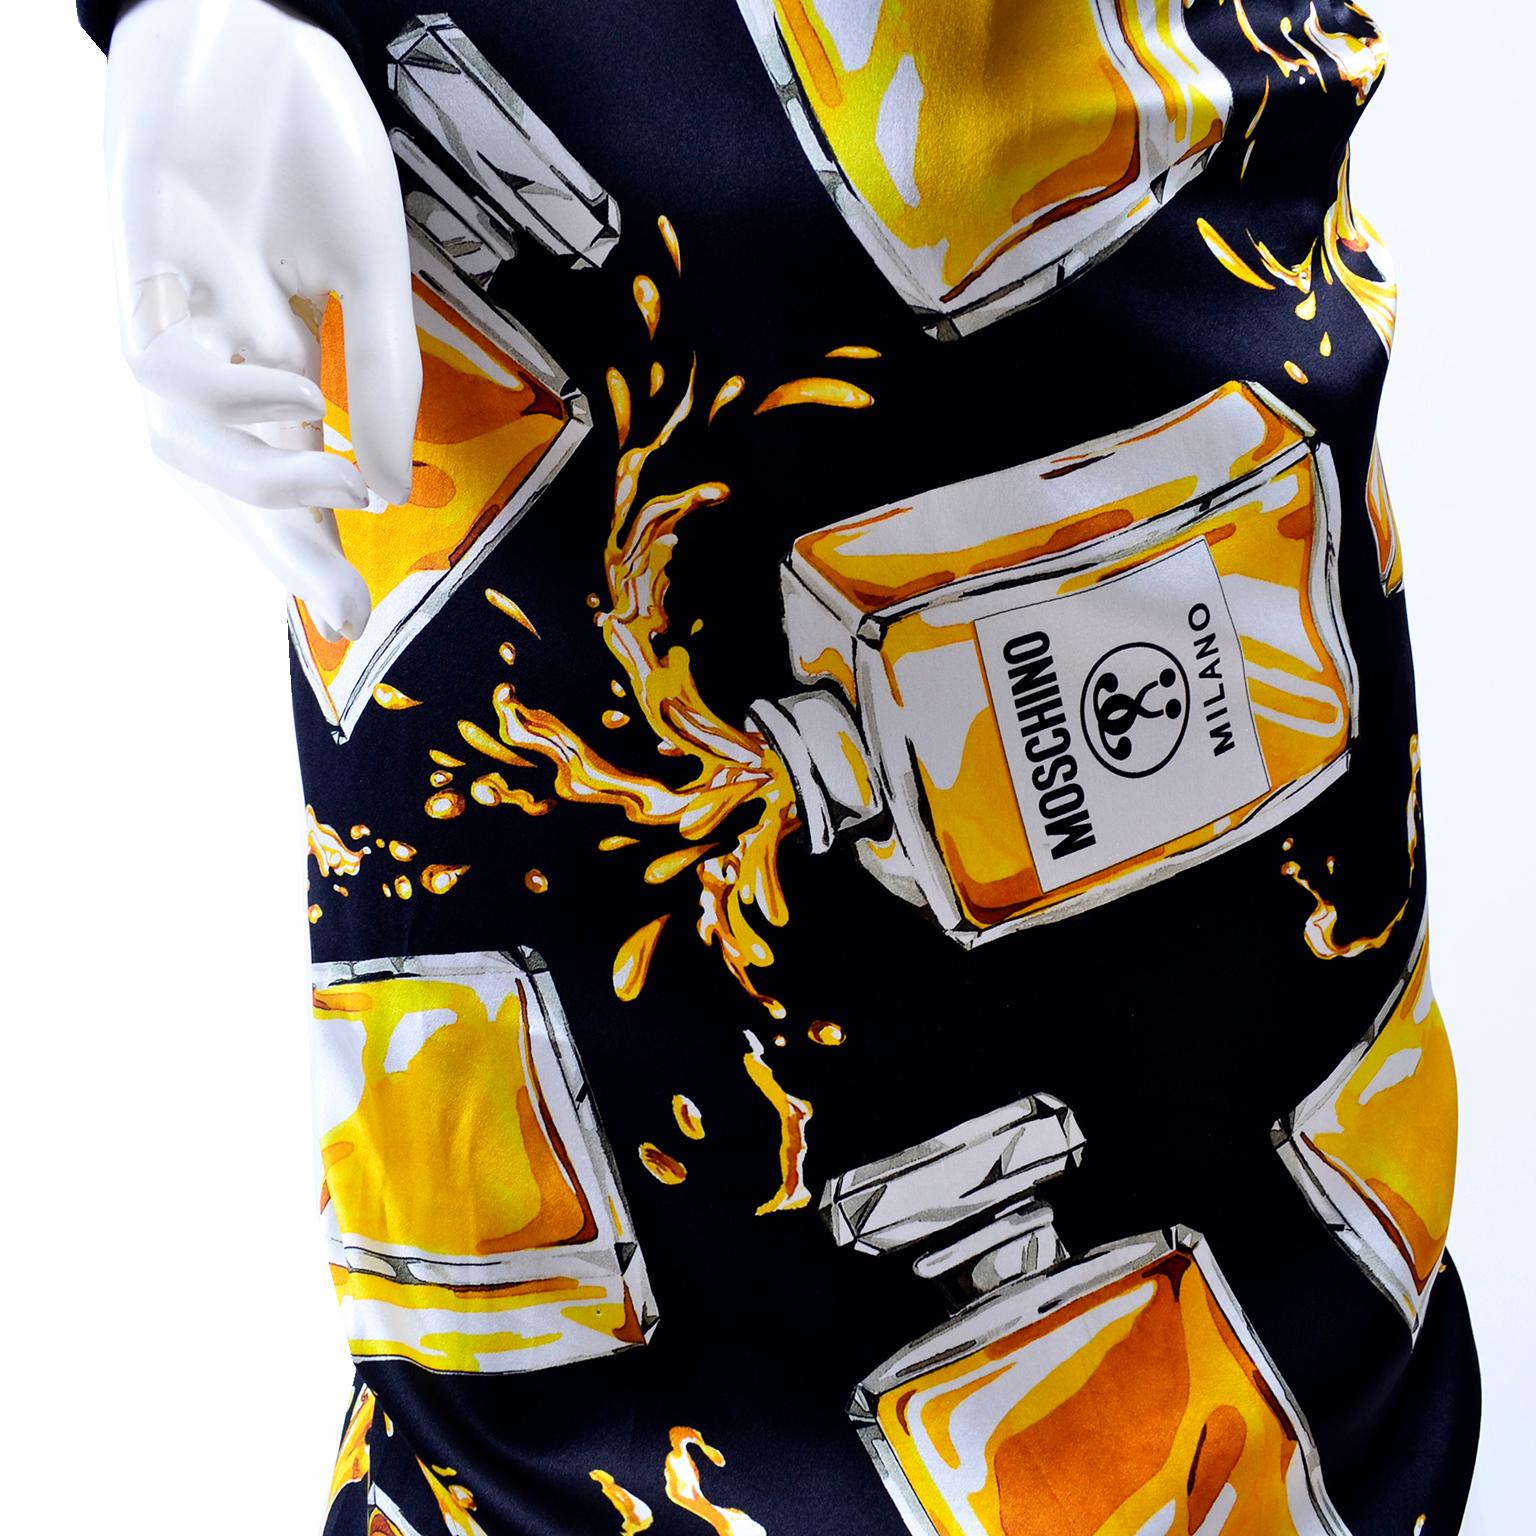 2016 Moschino Couture Spilled Perfume Bottle Print Dress New with Tags For Sale 3